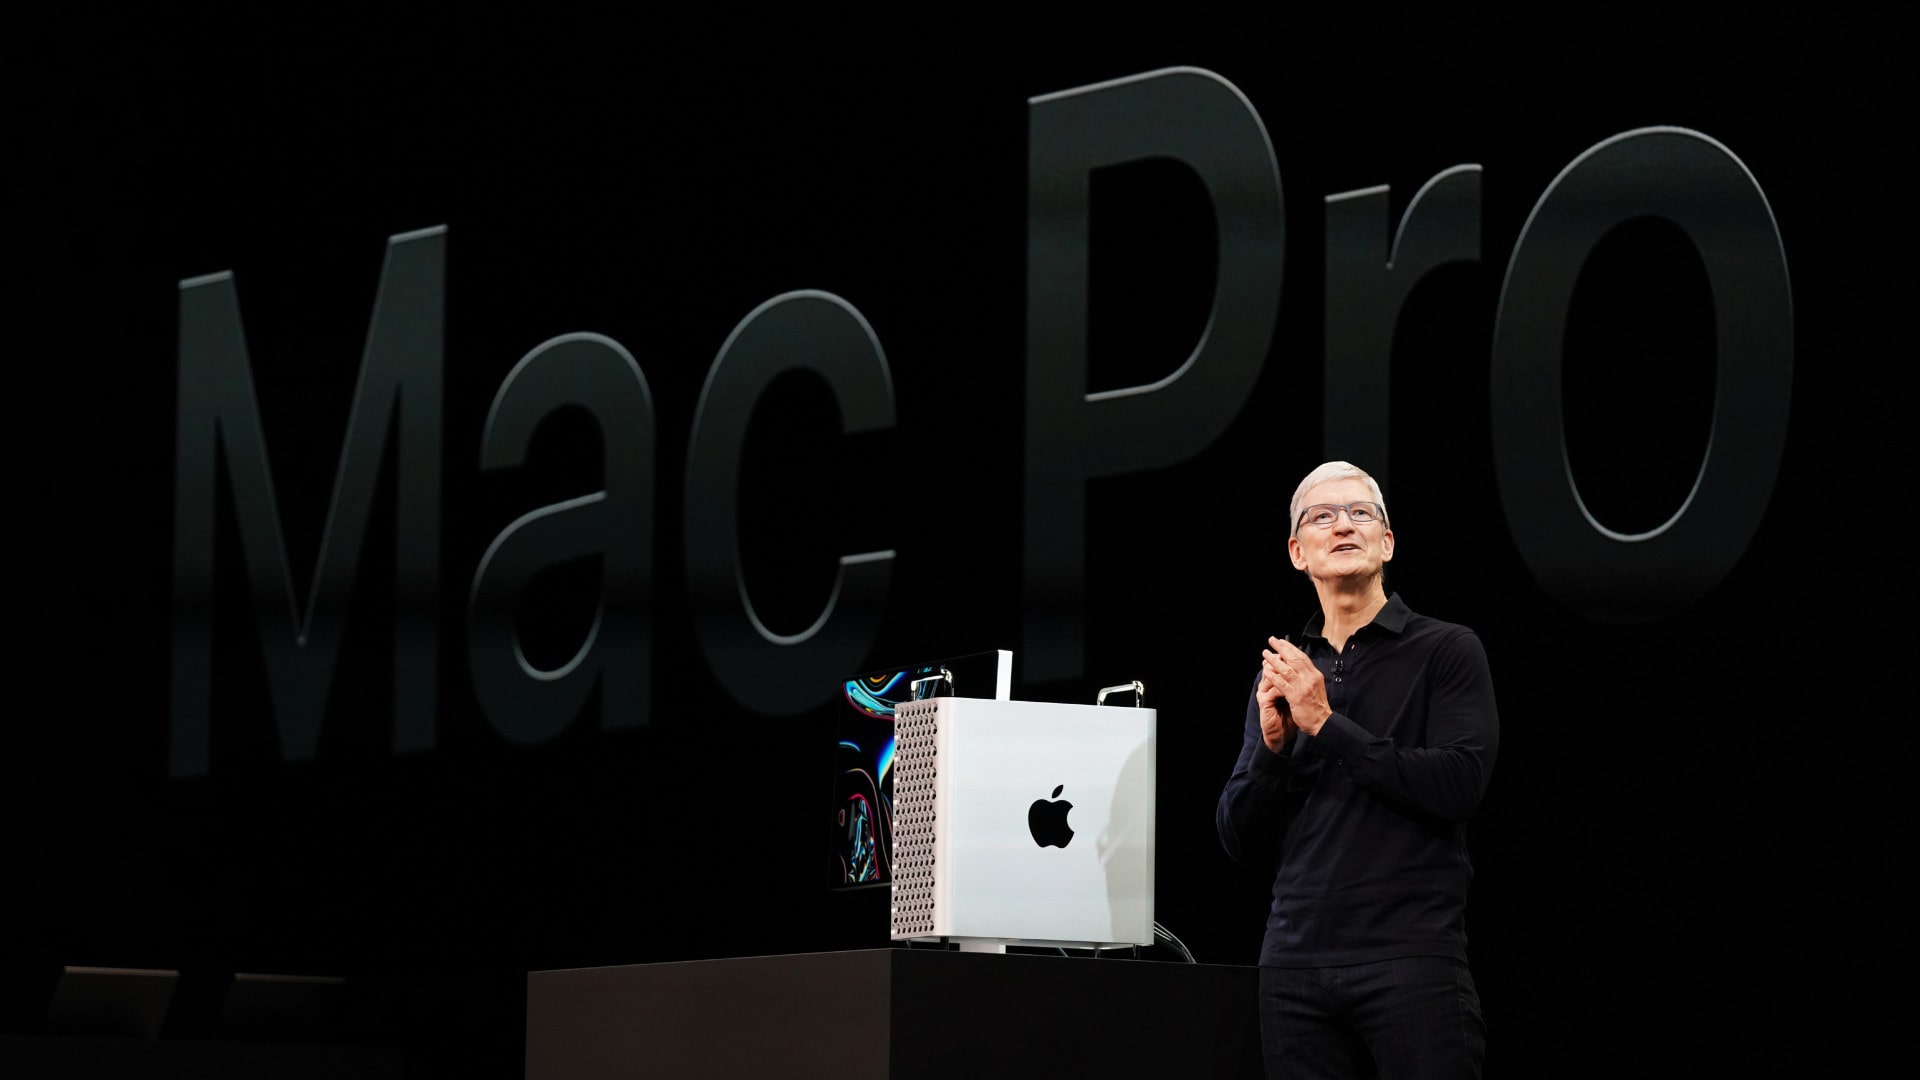 Apple CEO Tim Cook presents the Mac Pro on stage at WWDC 2019.